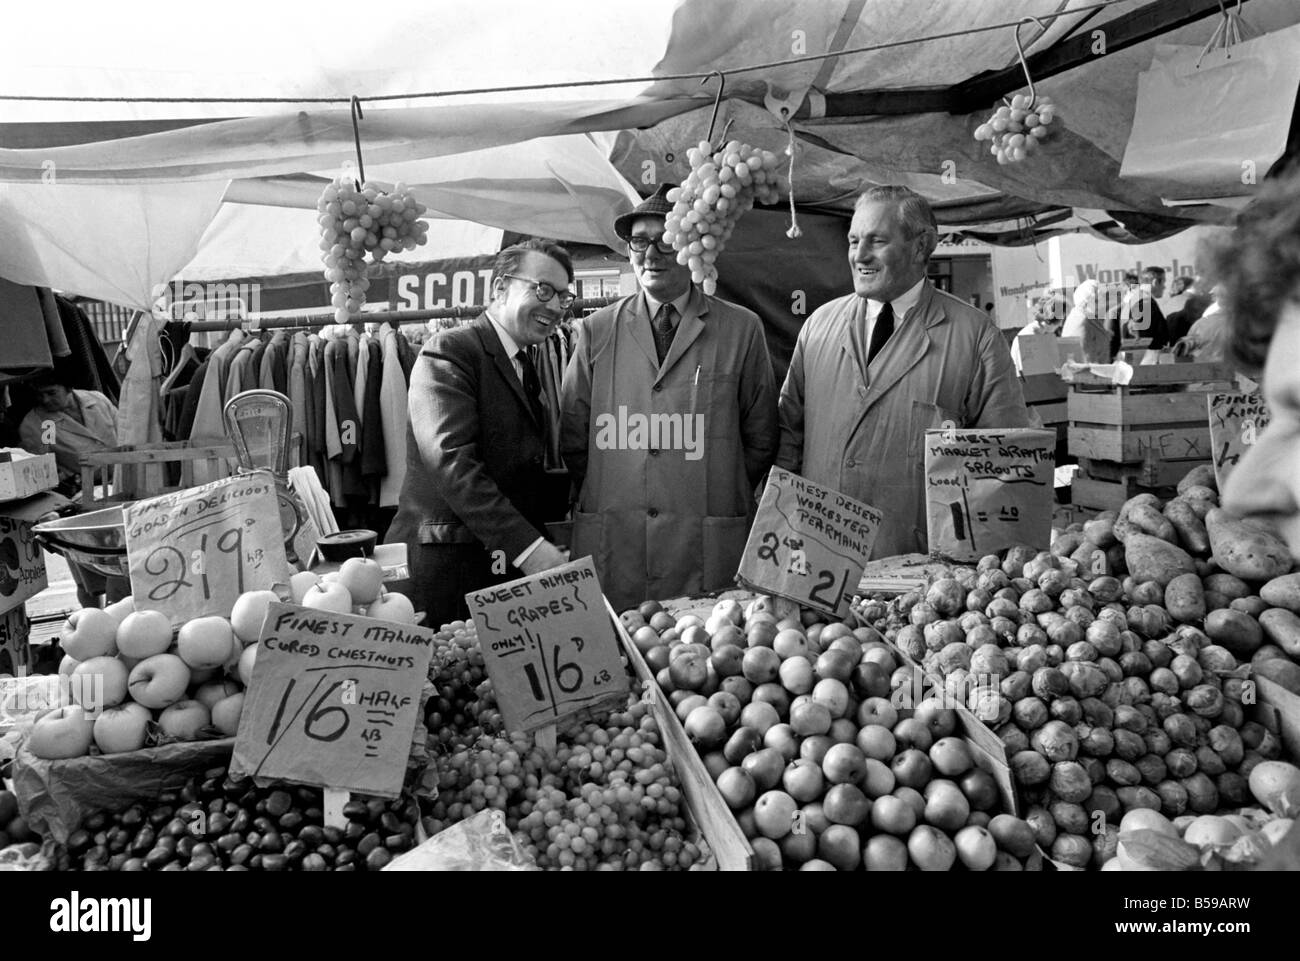 Politics: Elections: The Newcastle-under-Lyne by-election: The labour candidate, Golding, is seen talking to stall-holders in the market, serving fruit and portrait (wears glasses). October 1969 Z10368-010 Stock Photo